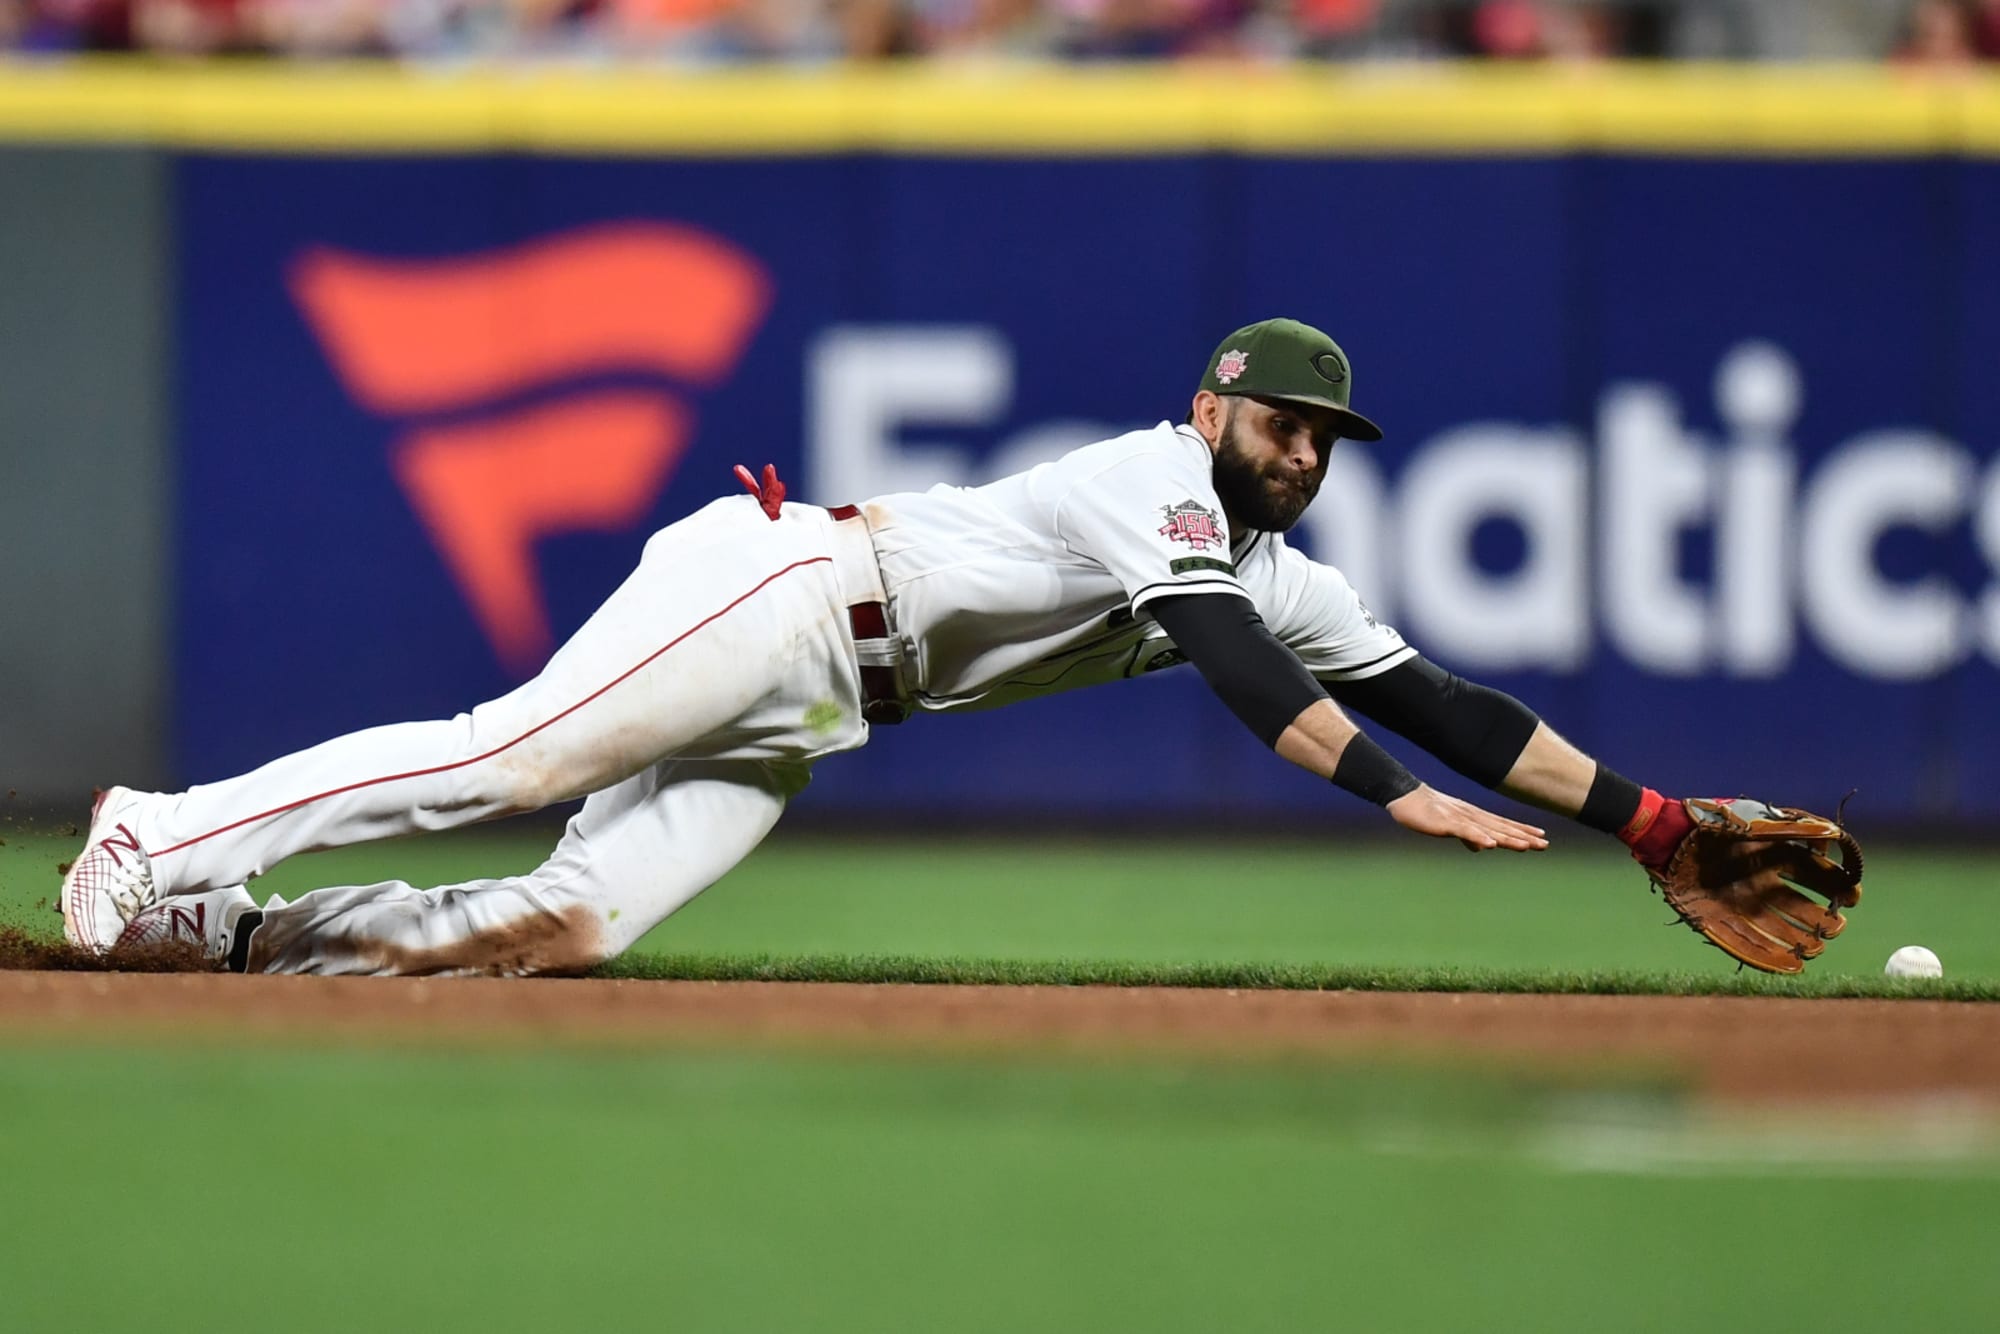 Red Sox sign free agent infielder-outfielder Jose Peraza